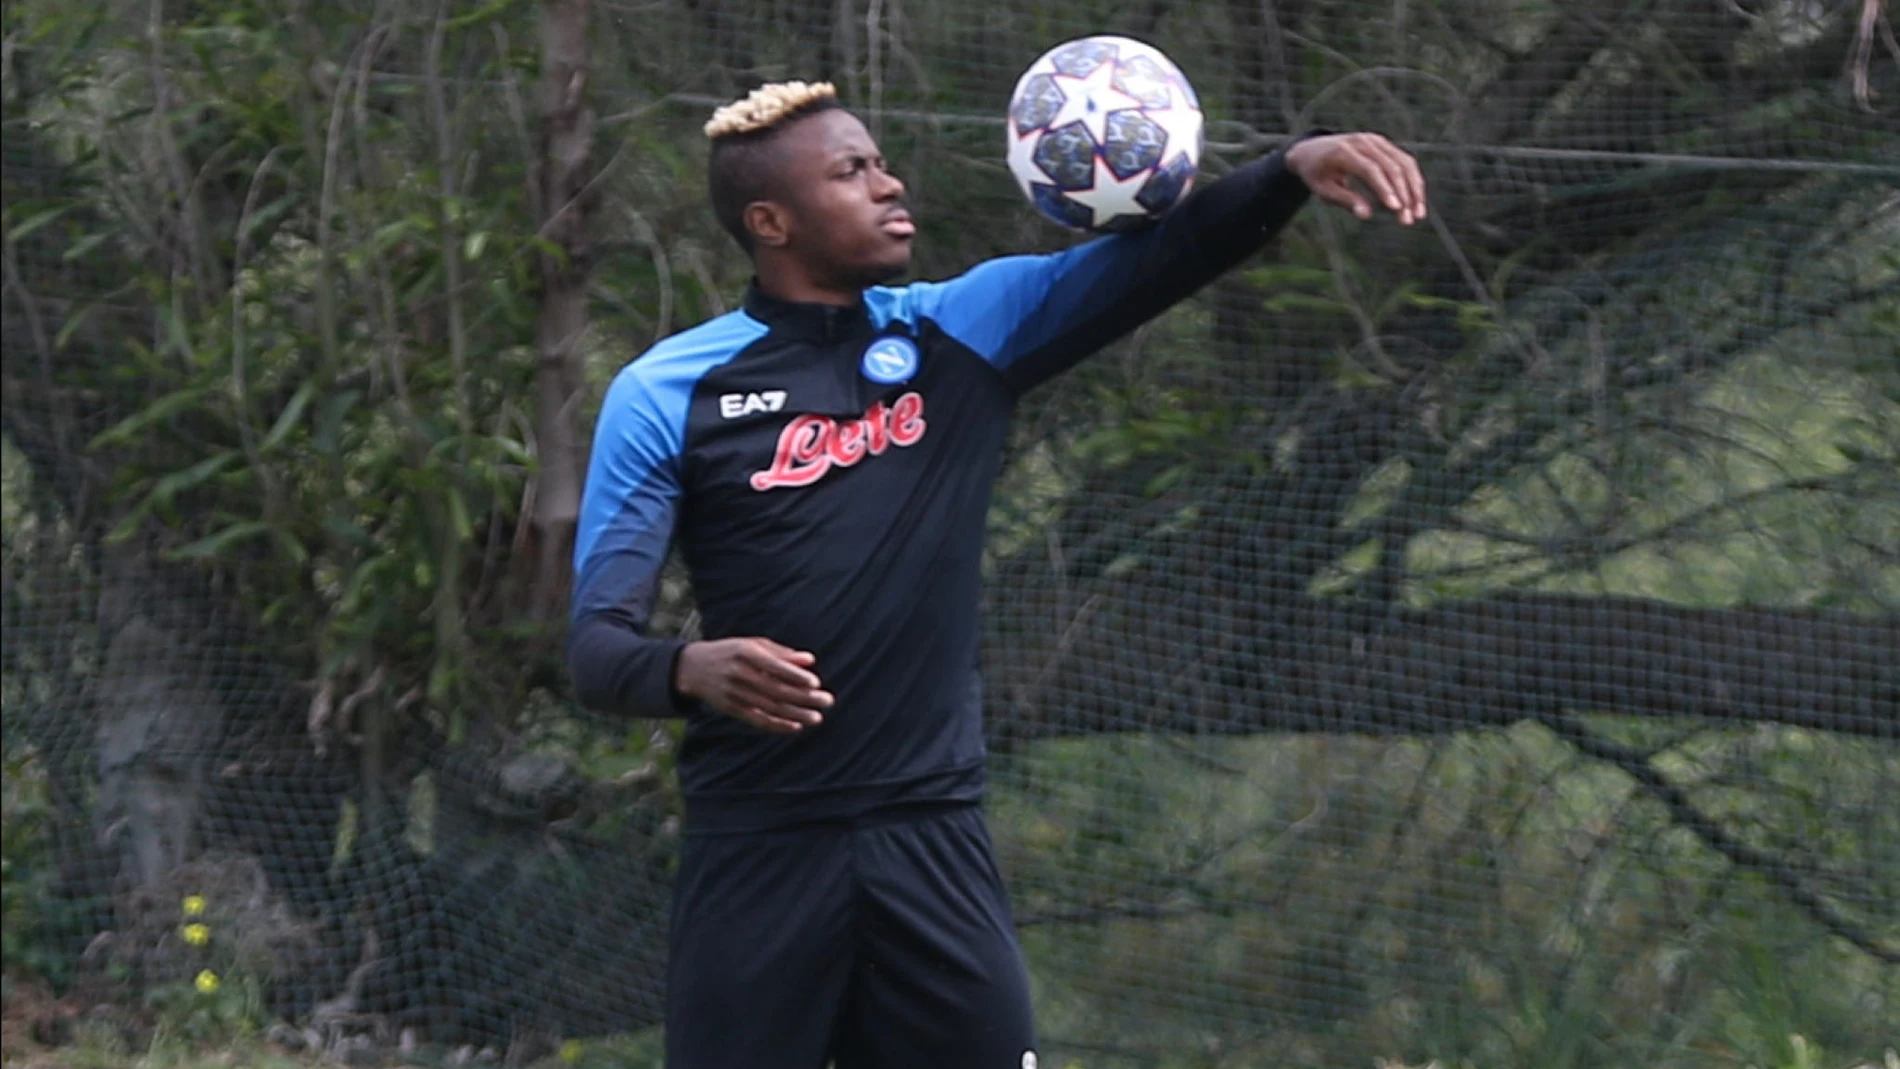 Naples (Italy), 17/04/2023.- Napoli's forward Victor Osimhen attends his team's training session at the club's training ground in Castel Volturno, north of Naples, Italy, 17 April 2023. Napoli will face AC Milan in the UEFA Champions league Quarter final second leg match on 18 April 2023. (Liga de Campeones, Italia, Nápoles) EFE/EPA/CESARE ABBATE 